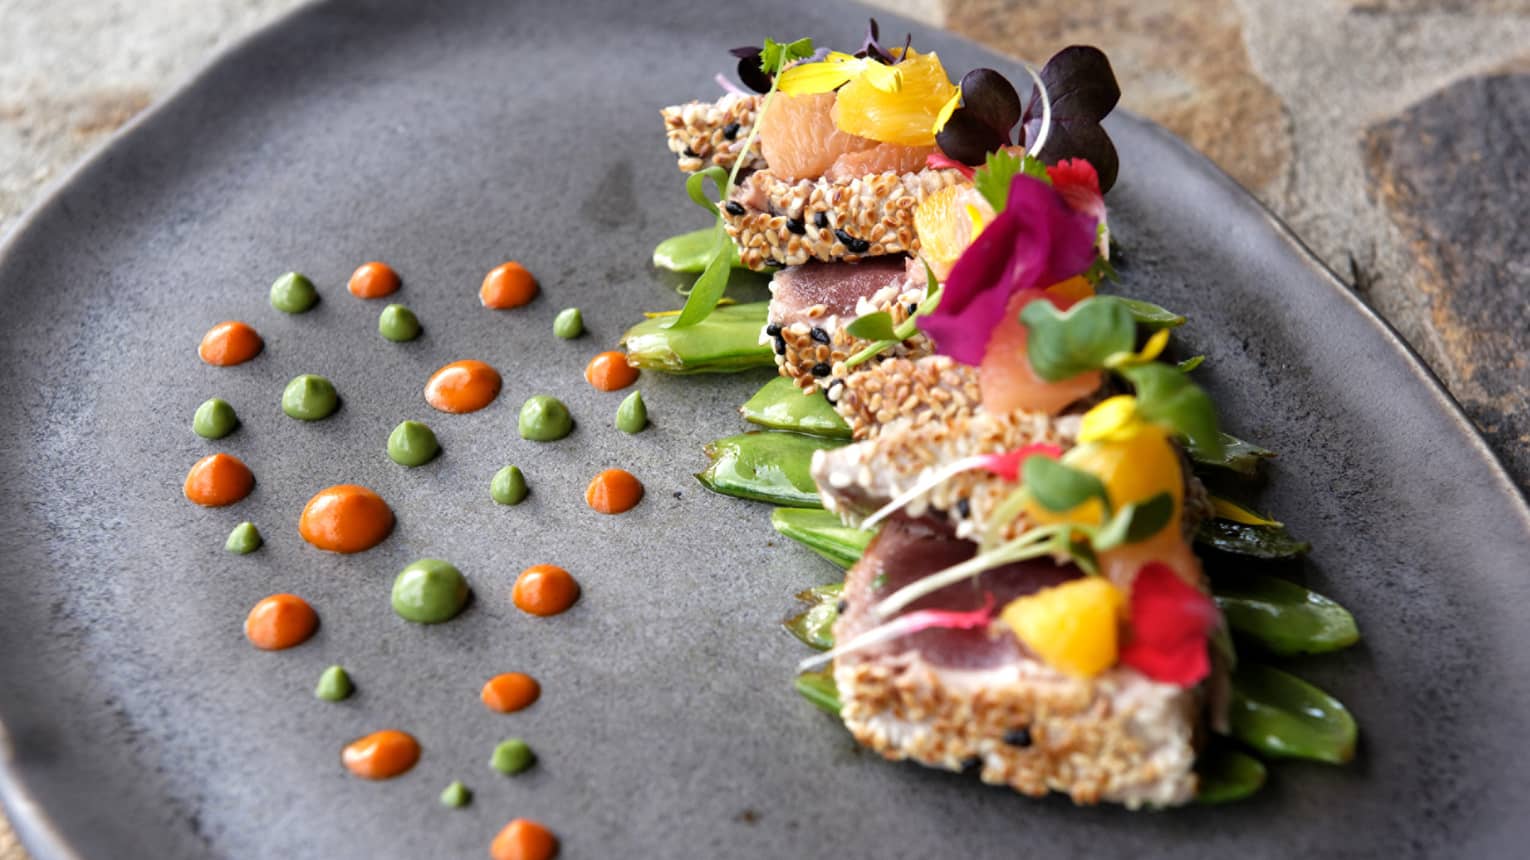 Sesame-crusted tuna topped with colourful edible flowers and green & orange dots